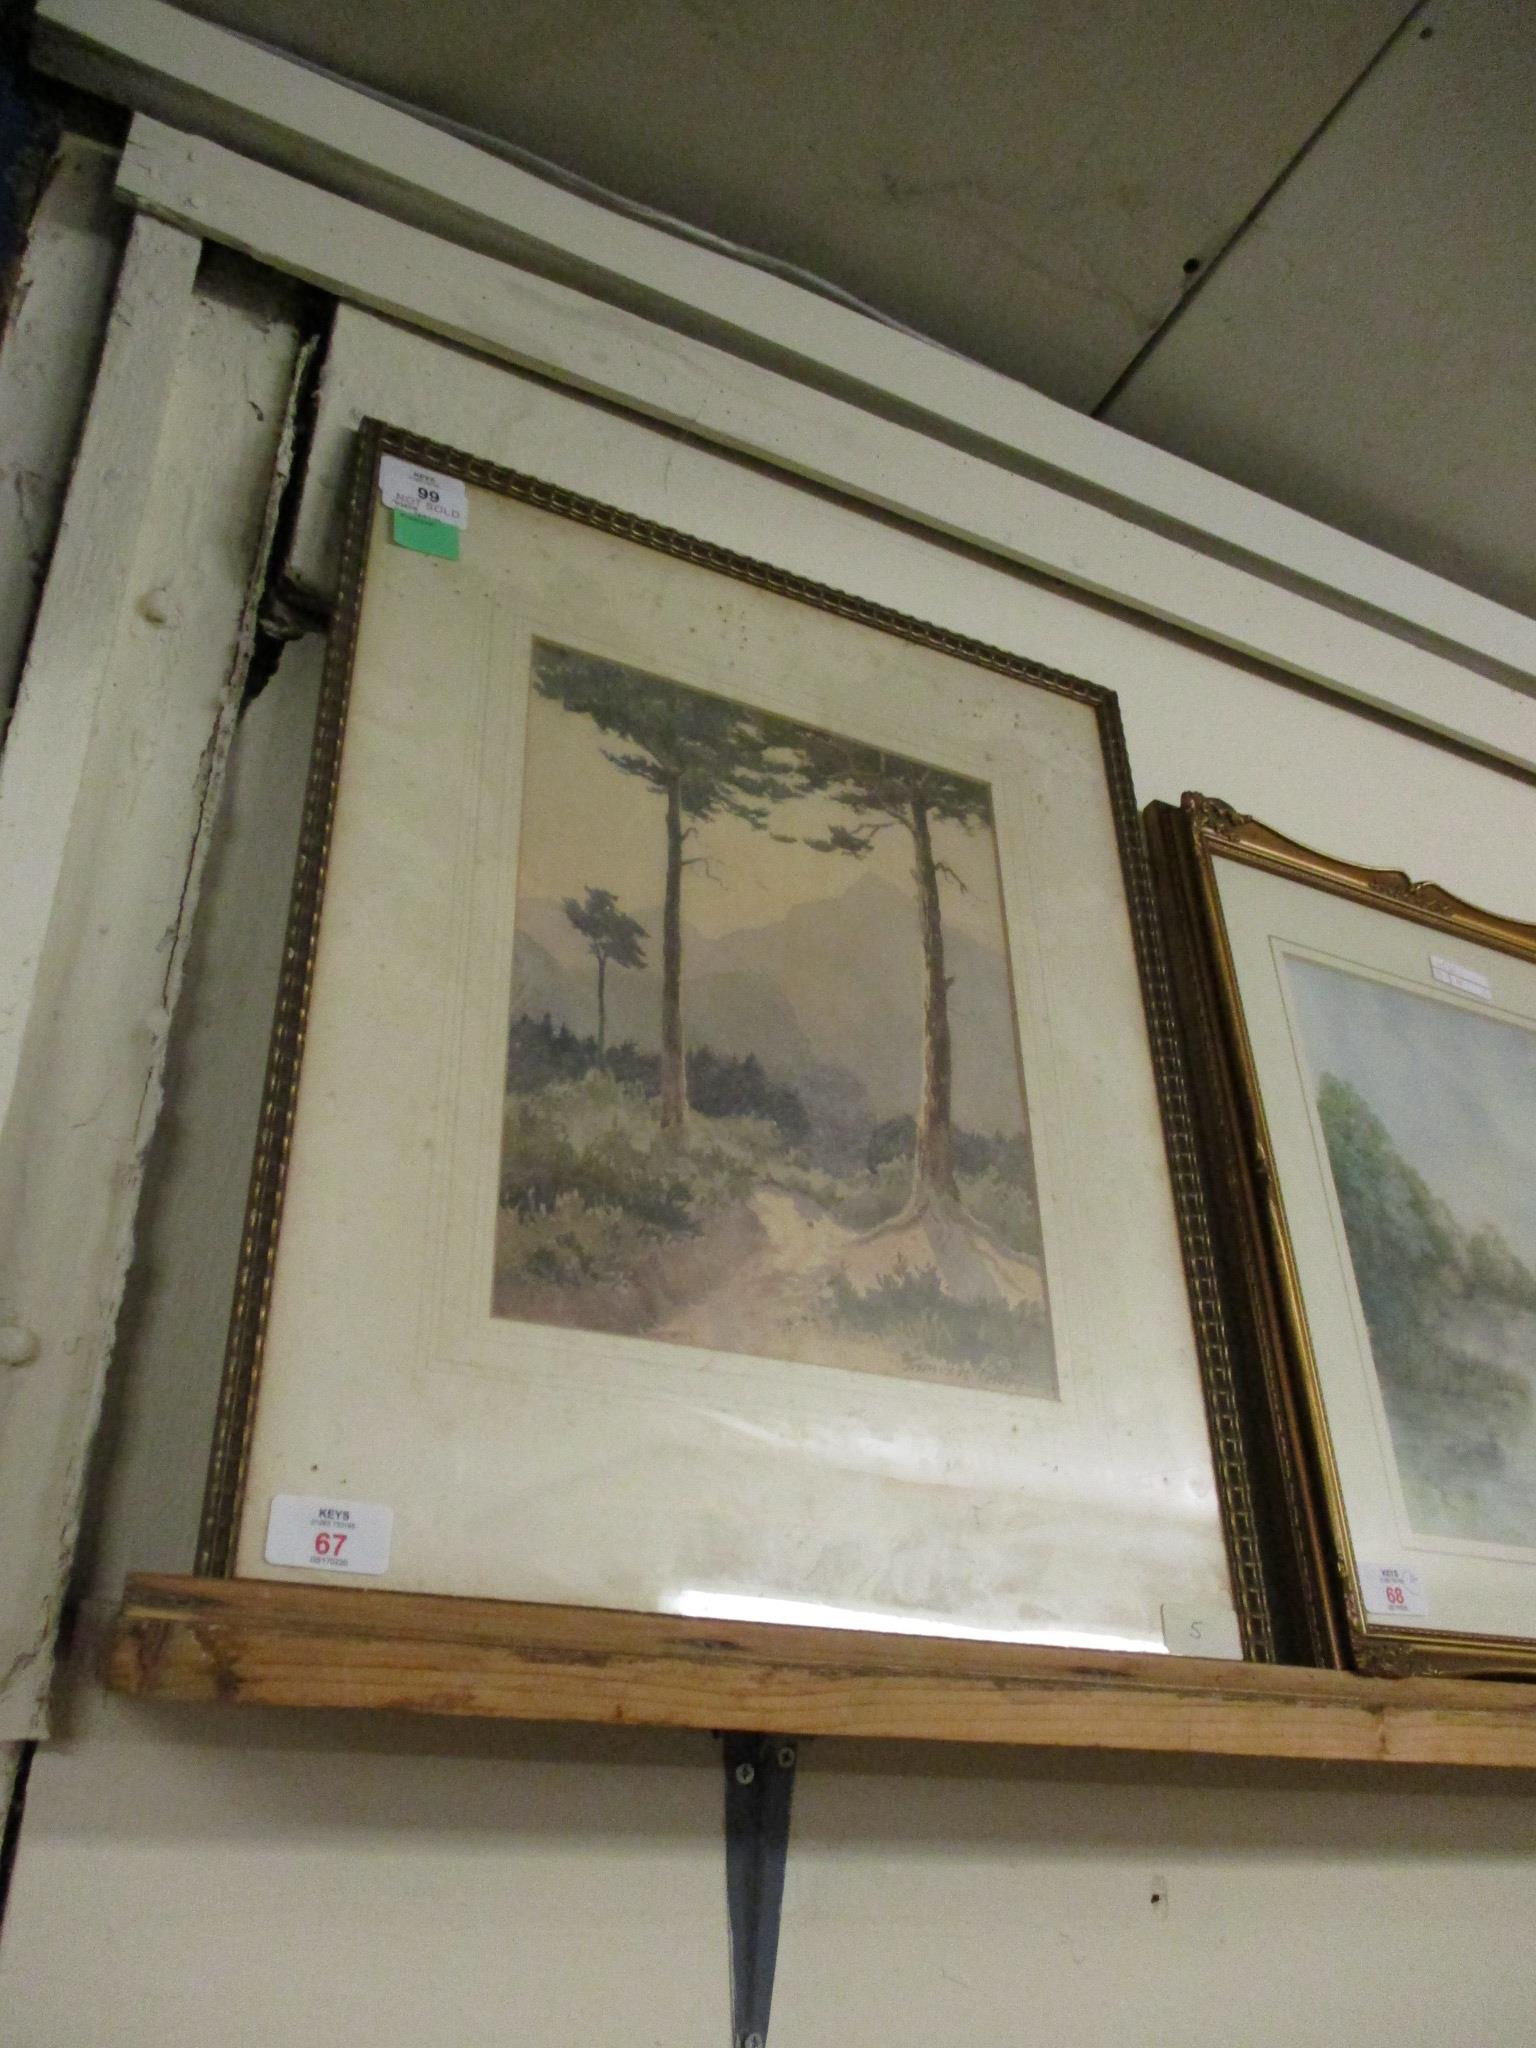 FRAMED WATERCOLOUR OF A LANDSCAPE BY JAMES PARRY